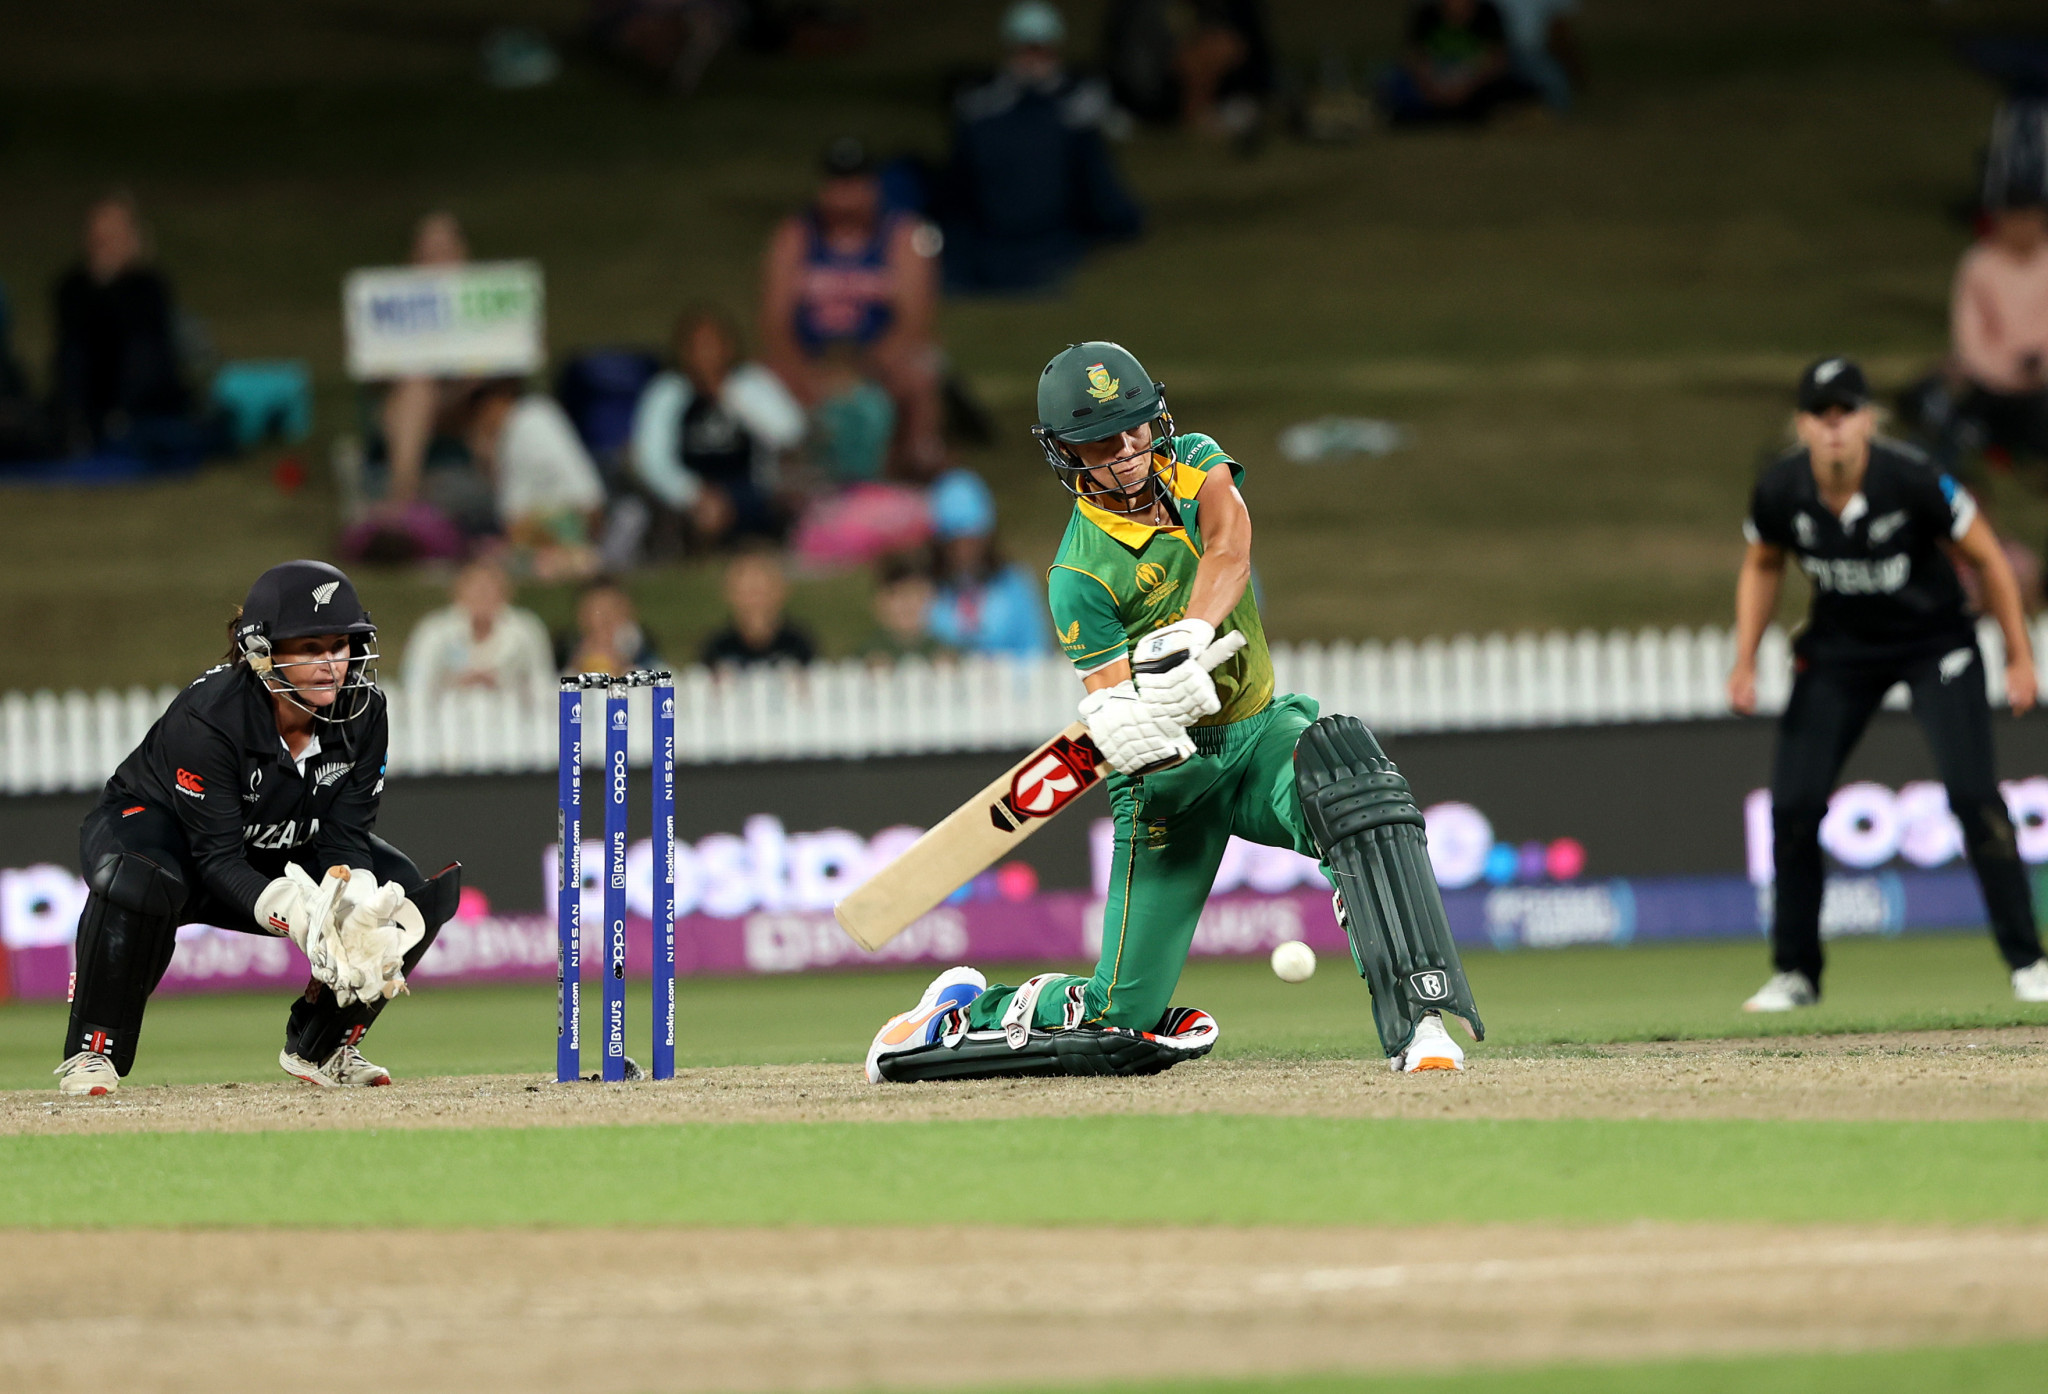 Marizanne Kapp's unbeaten 34 was instrumental in South Africa's two-wicket victory over New Zealand ©Getty Images